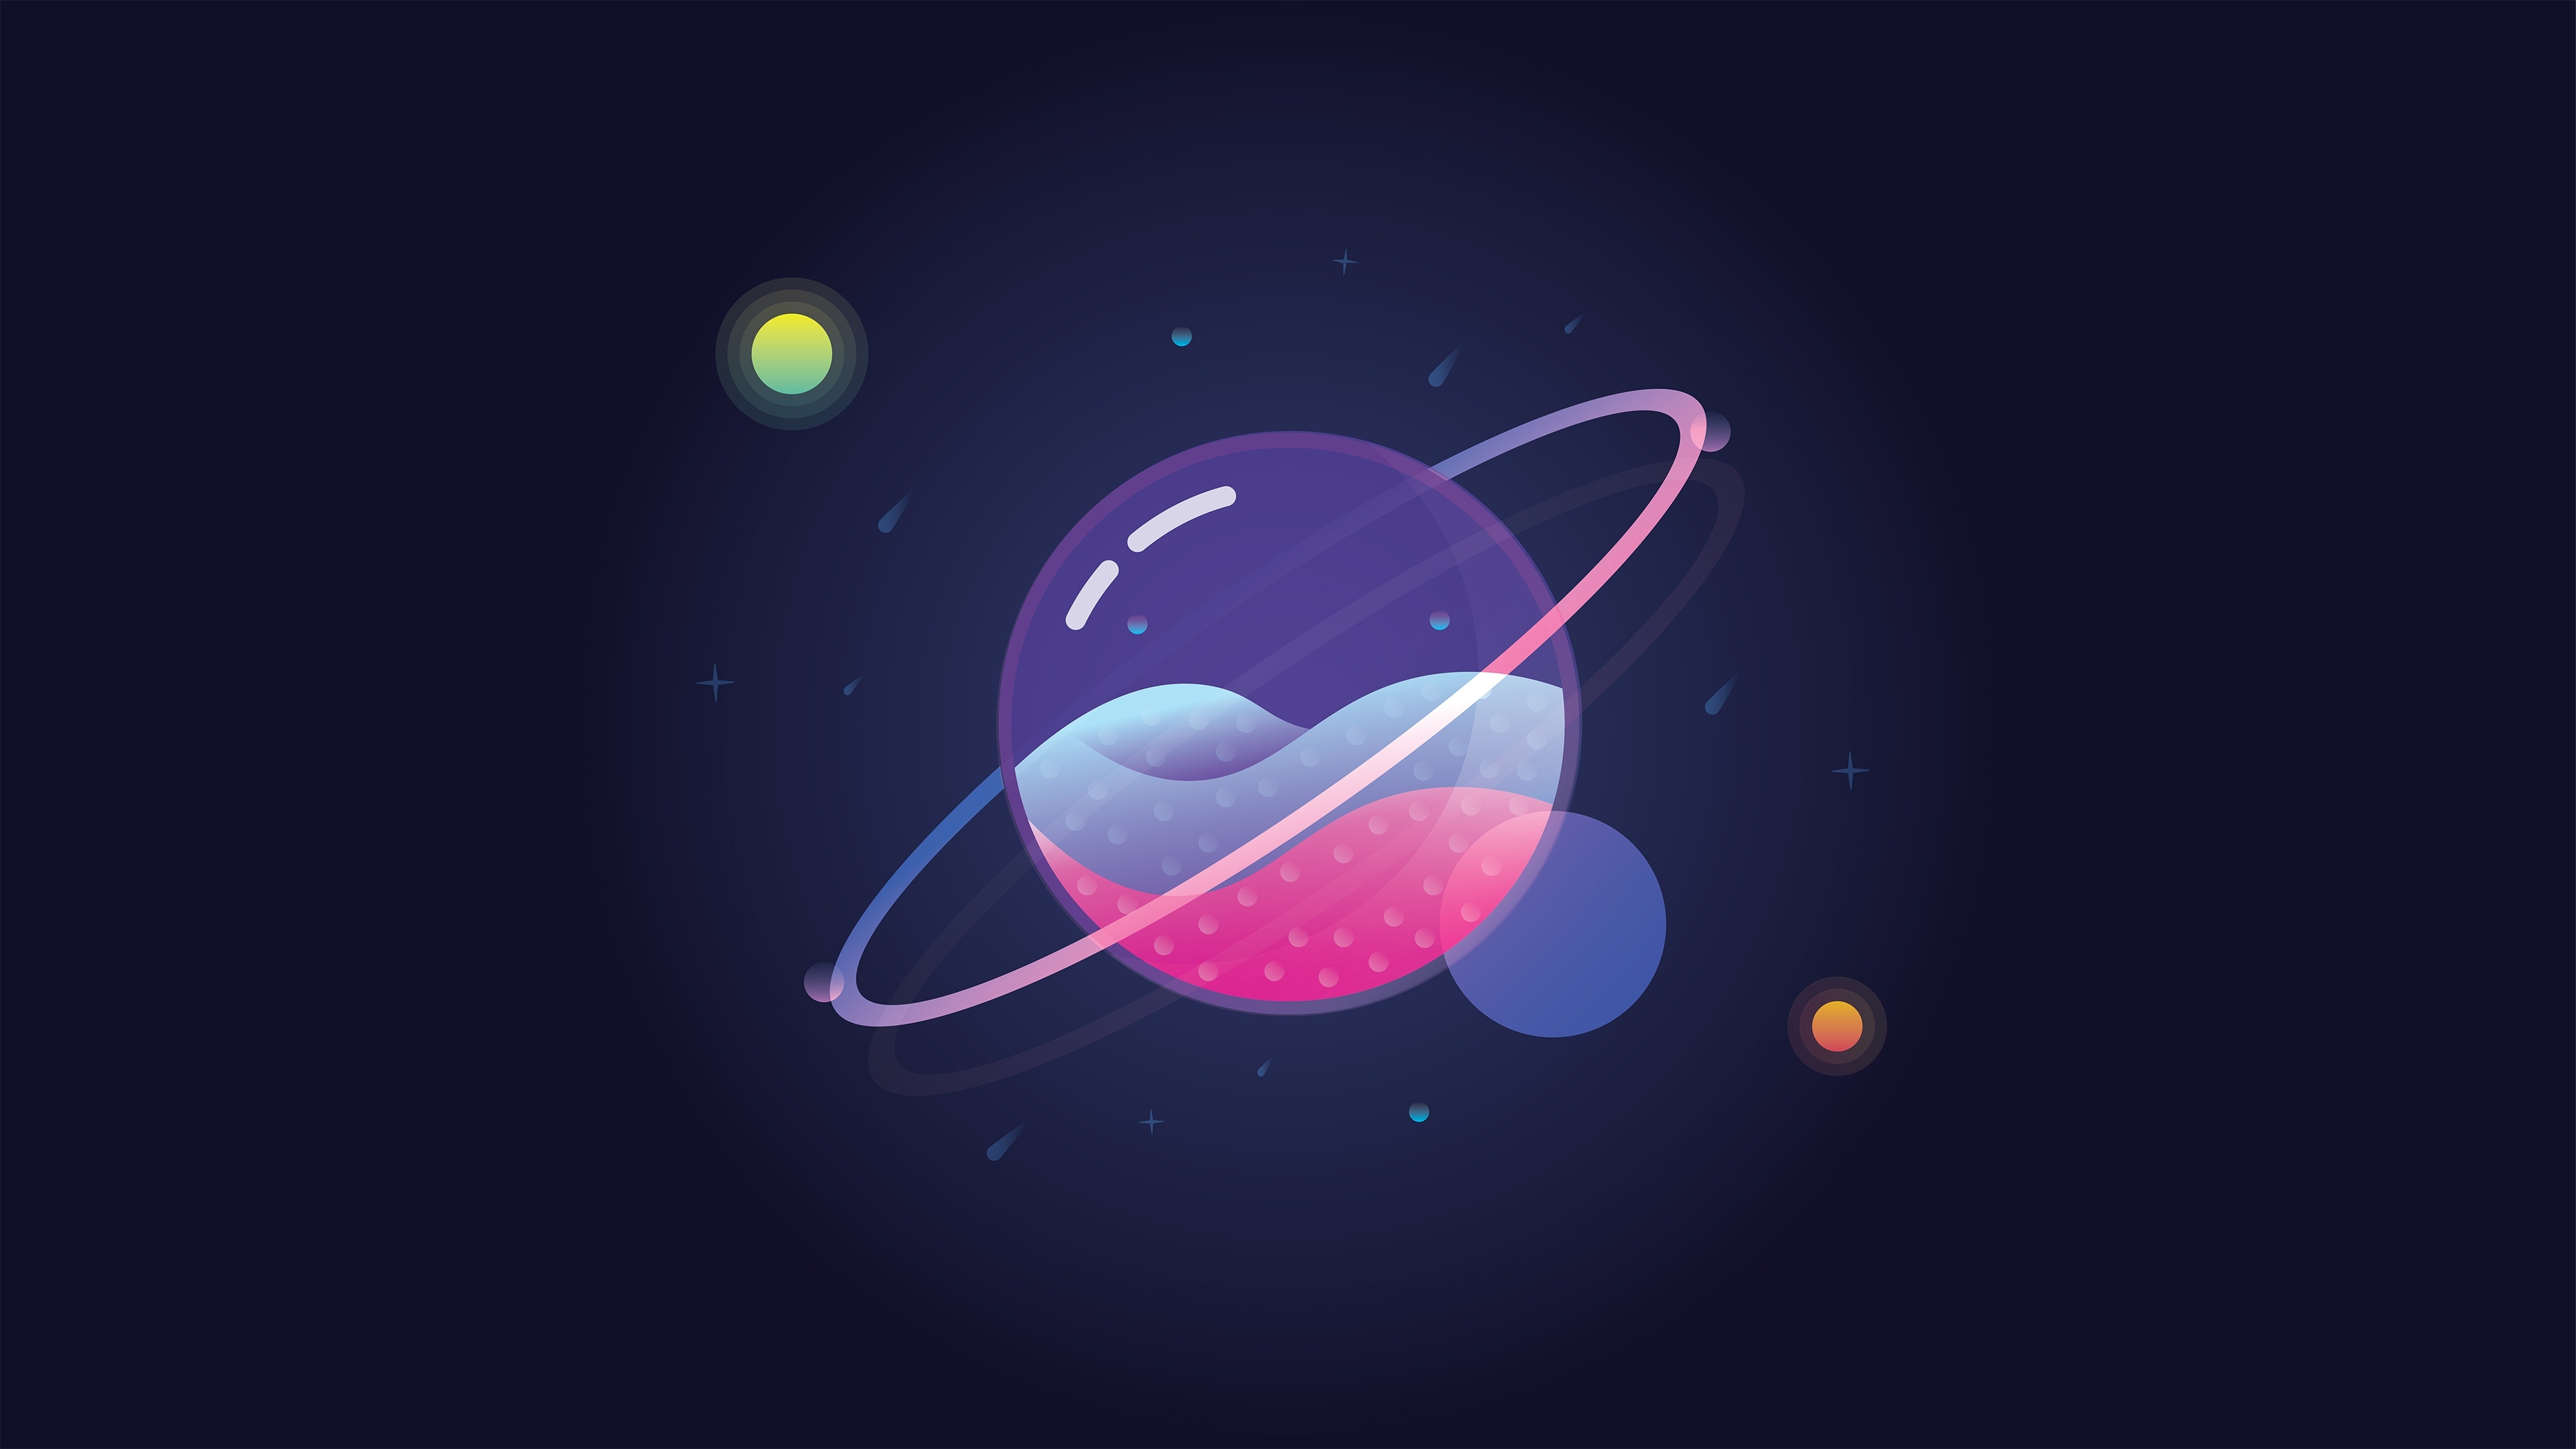 Space Planet Saturn Star Art Illustration Purple iPhone 8 Wallpapers Free  Download